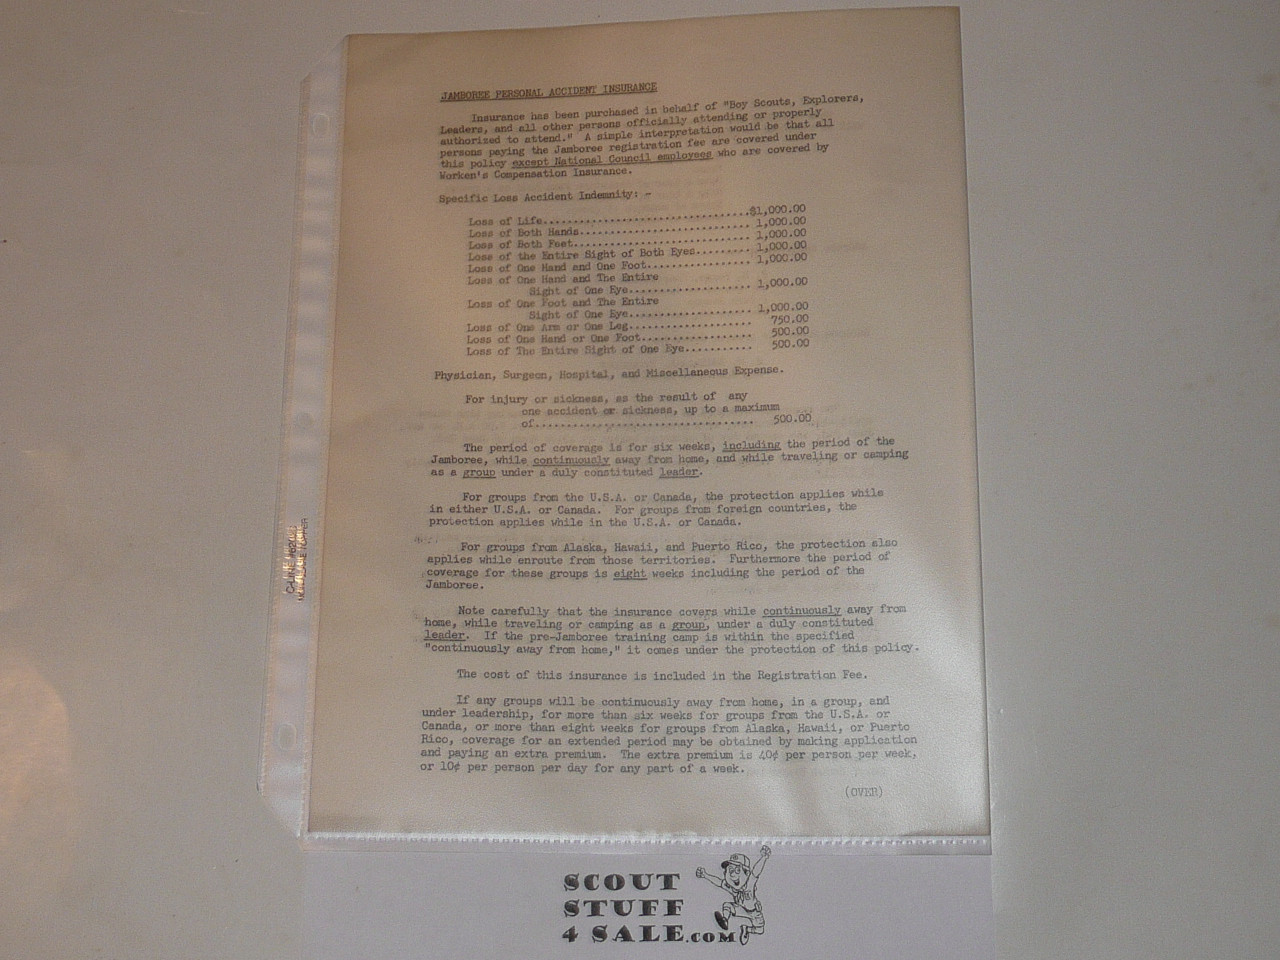 1950 National Jamboree Insurance Information from National